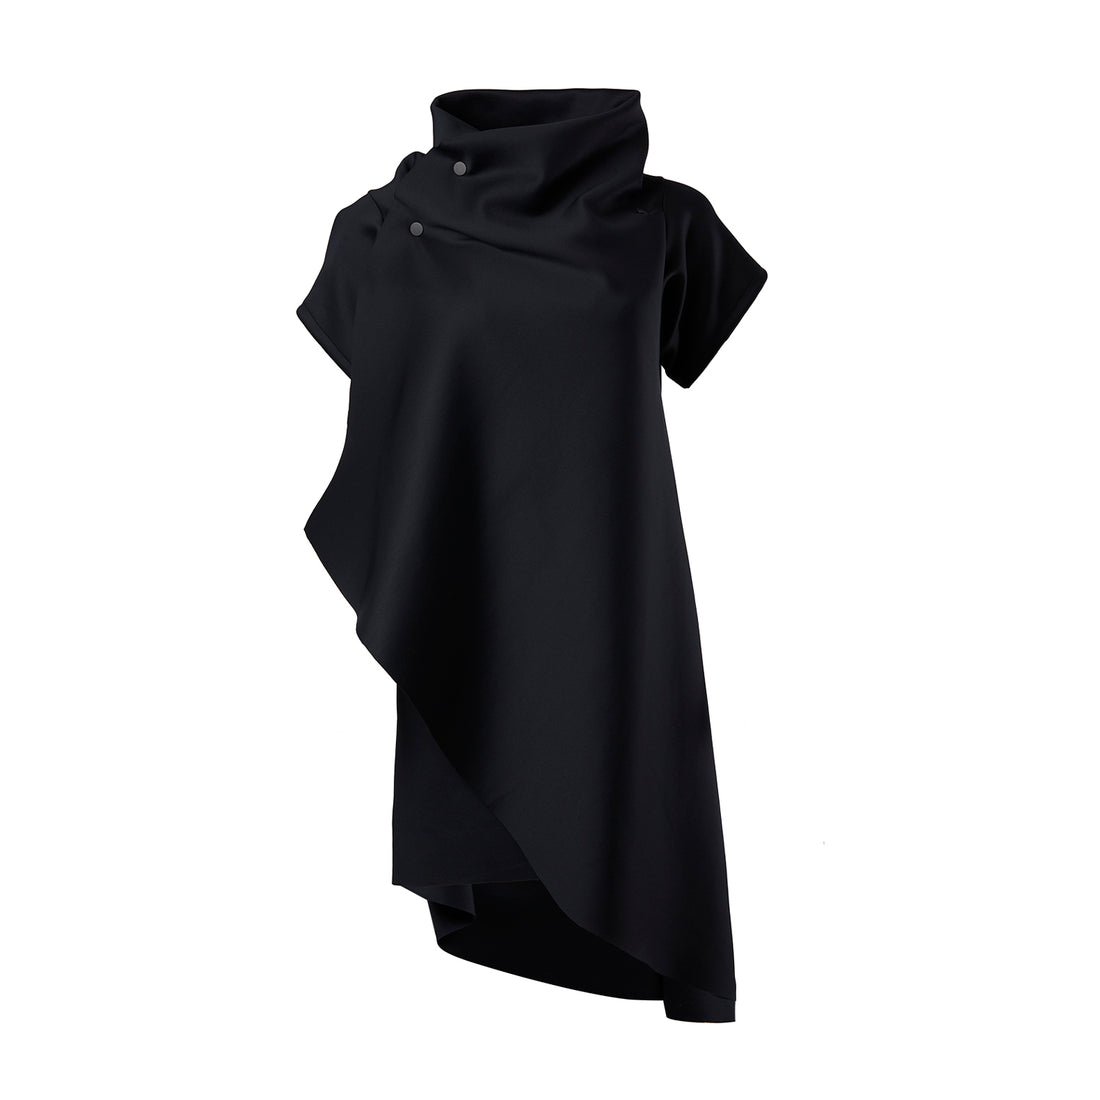 Black shift dress with sleeves held together with snaps in a loose-fit by Malaika New York